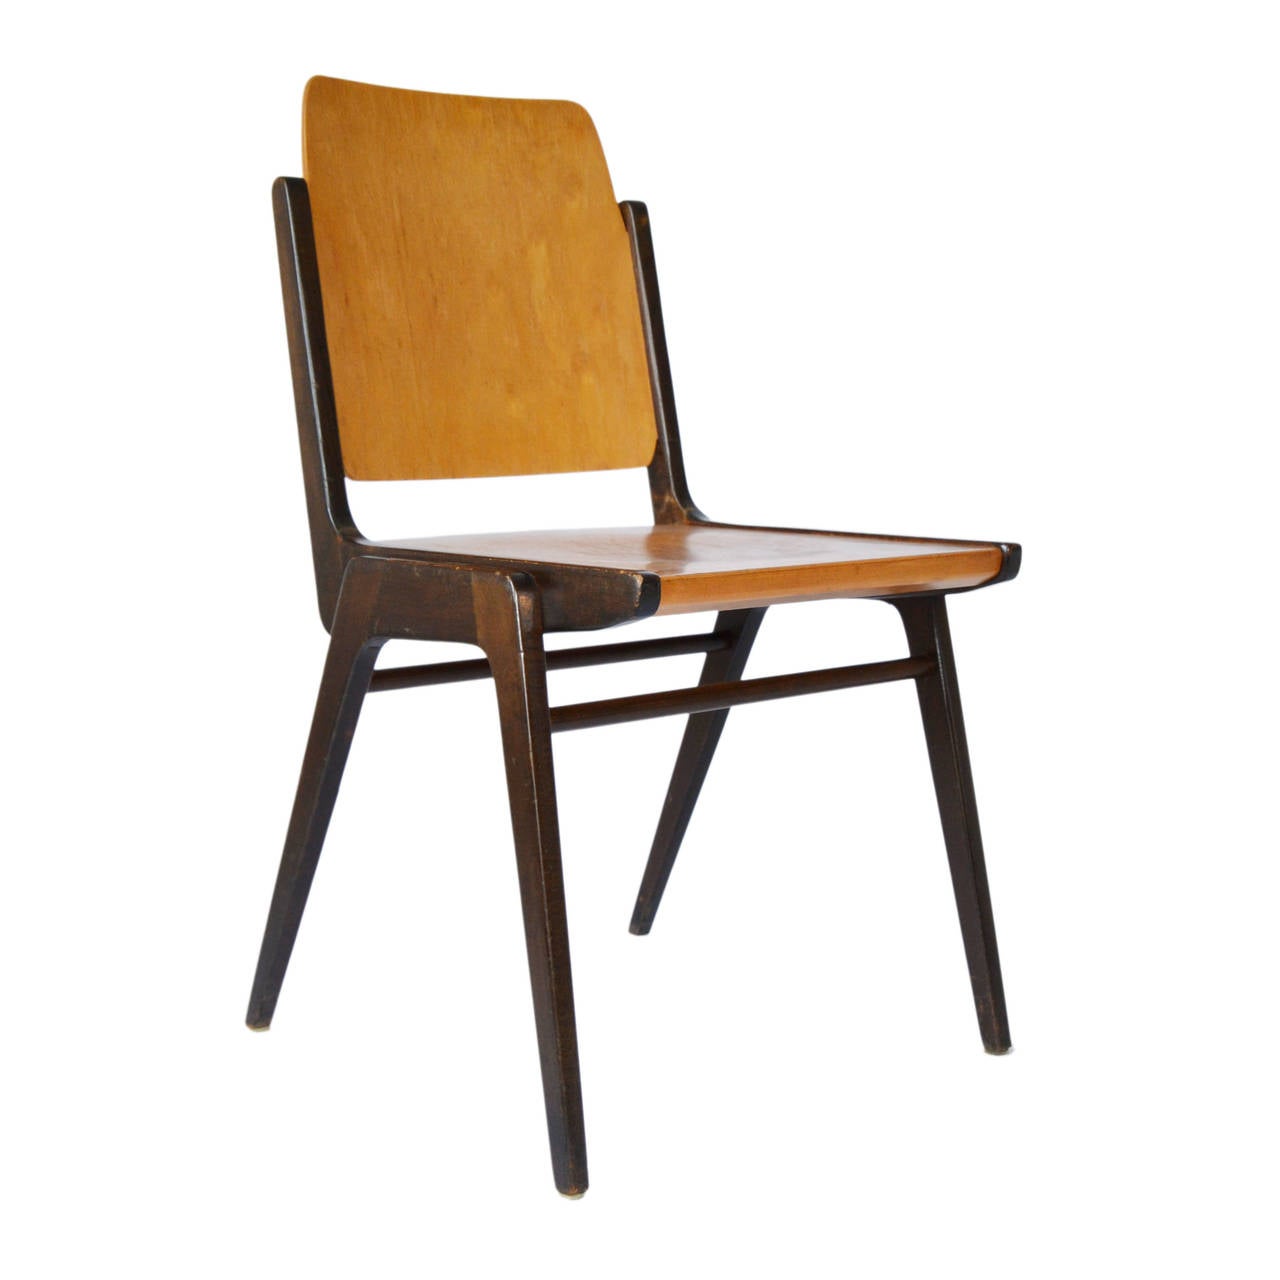 Austrian One of 12 Stacking Chairs Franz Schuster, Bicolored Beech, Austria, 1959 For Sale